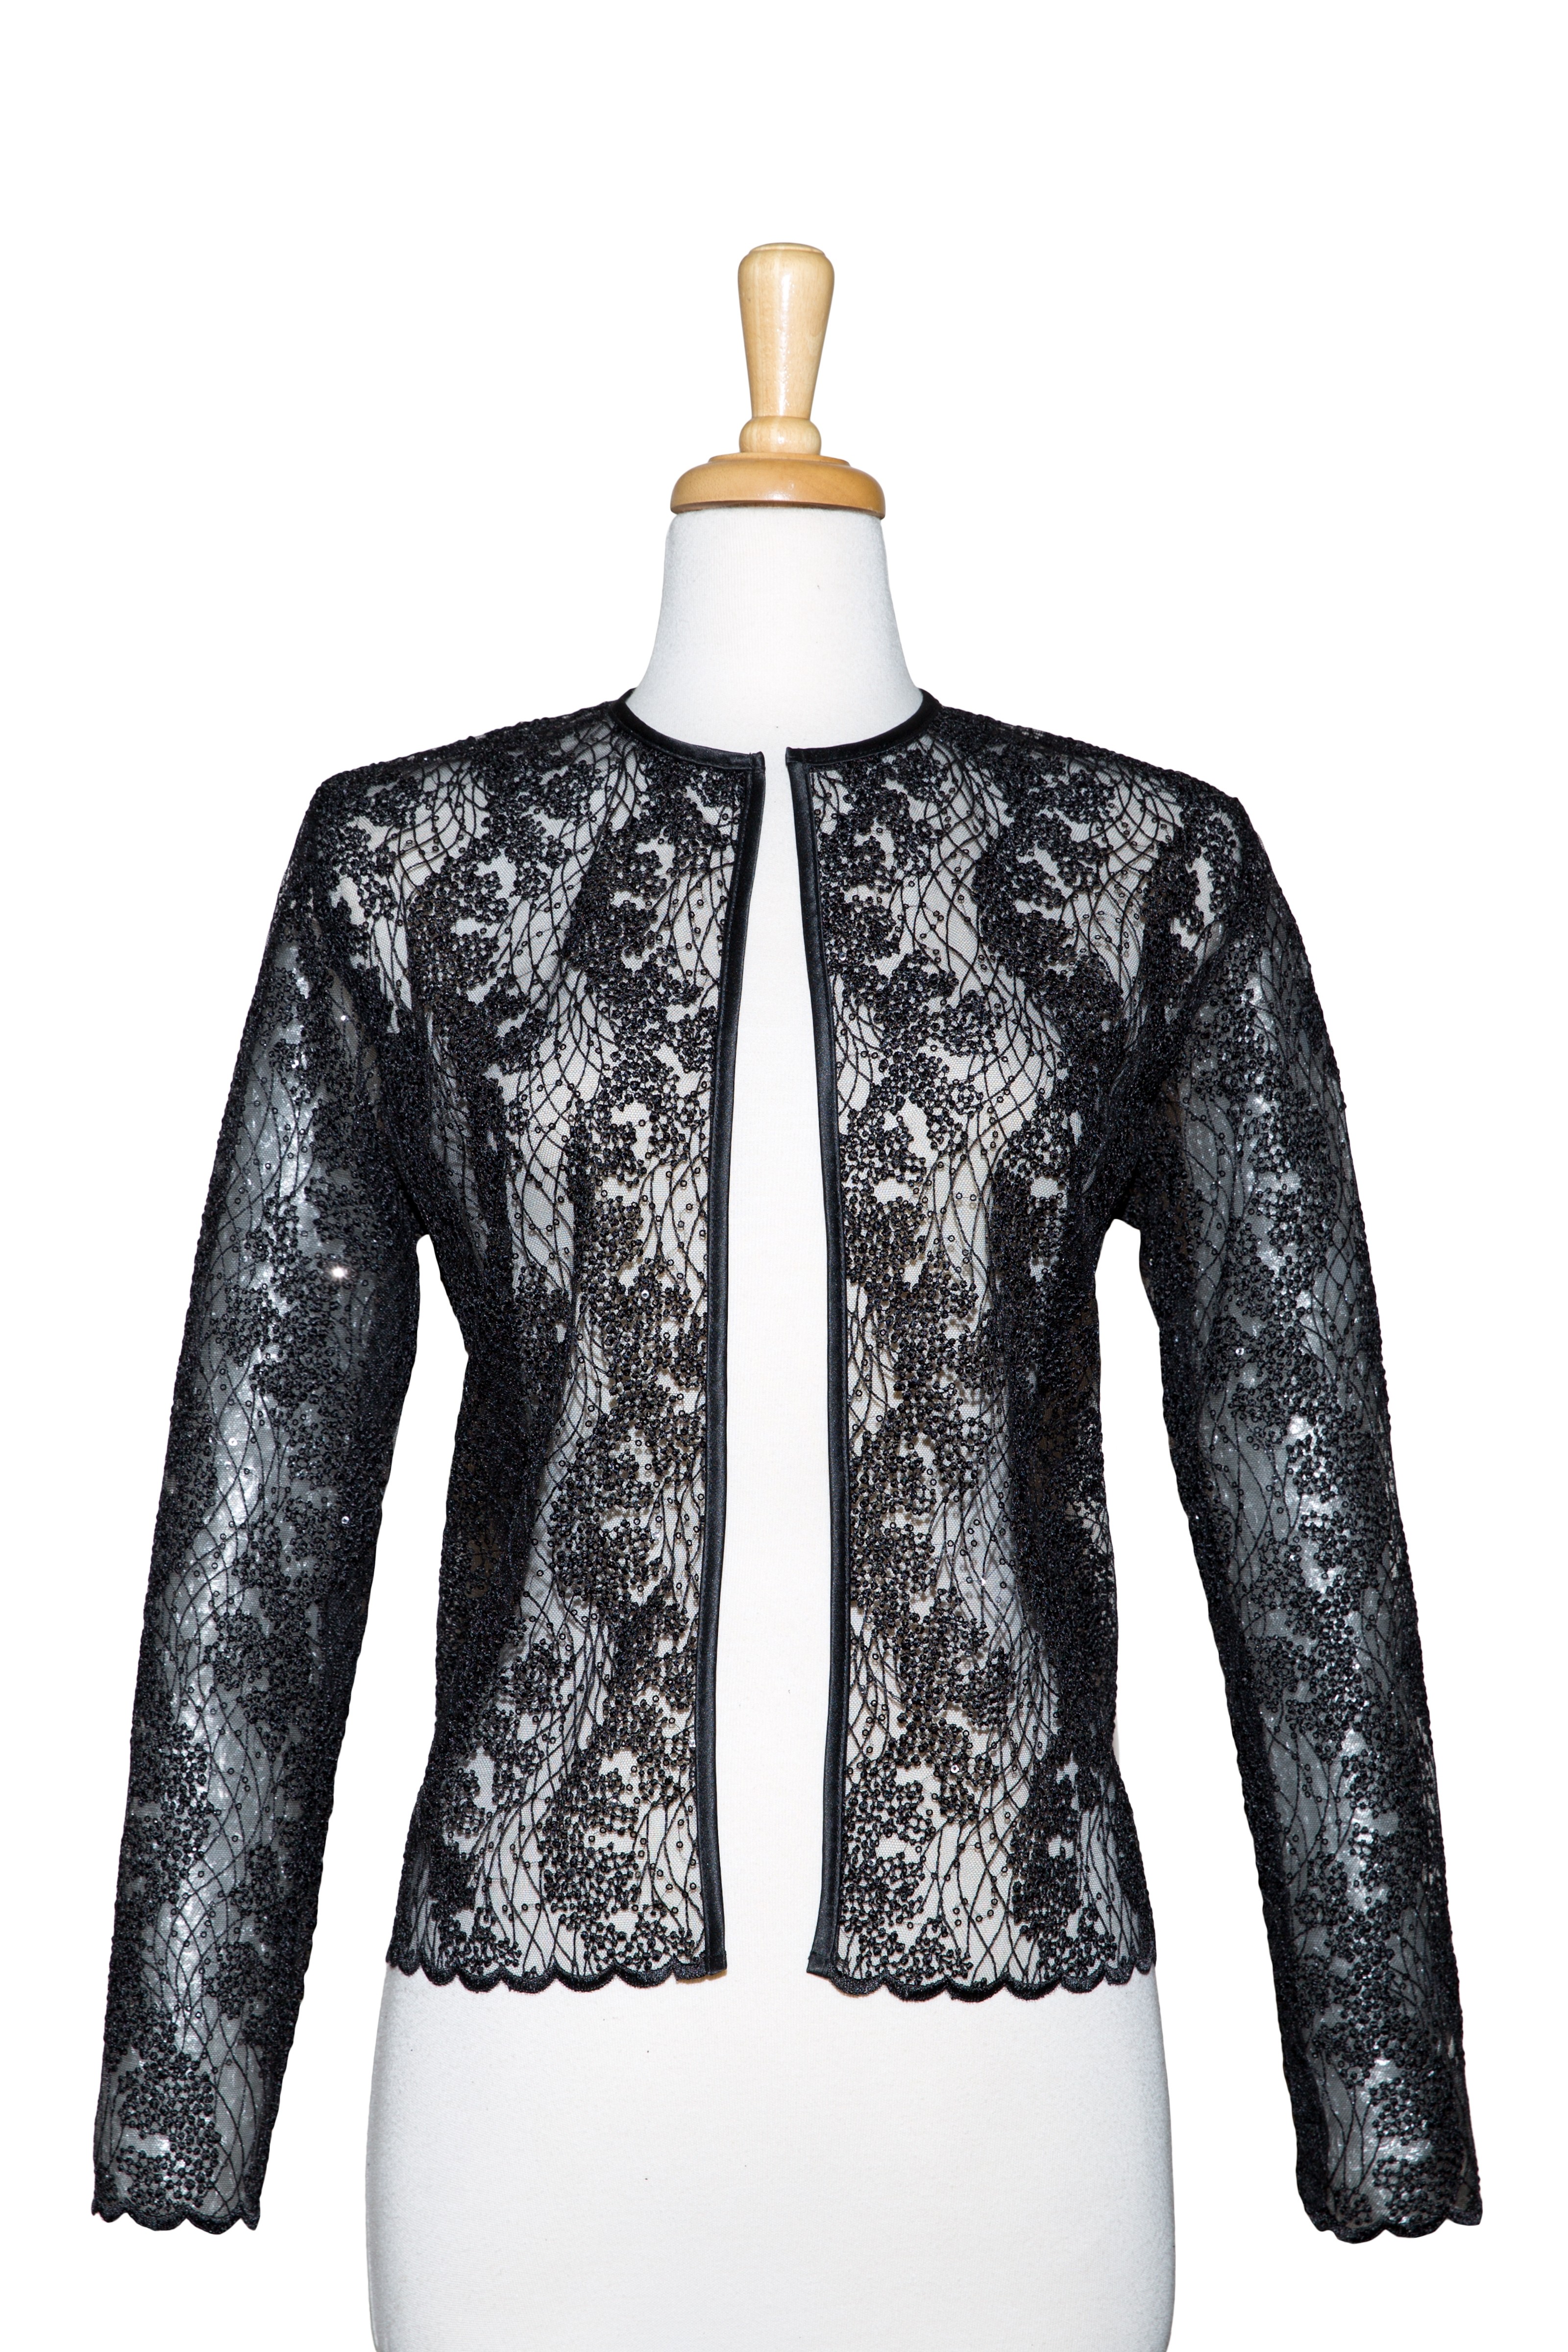  Black Embroidered Sequins  Lace  Jacket 